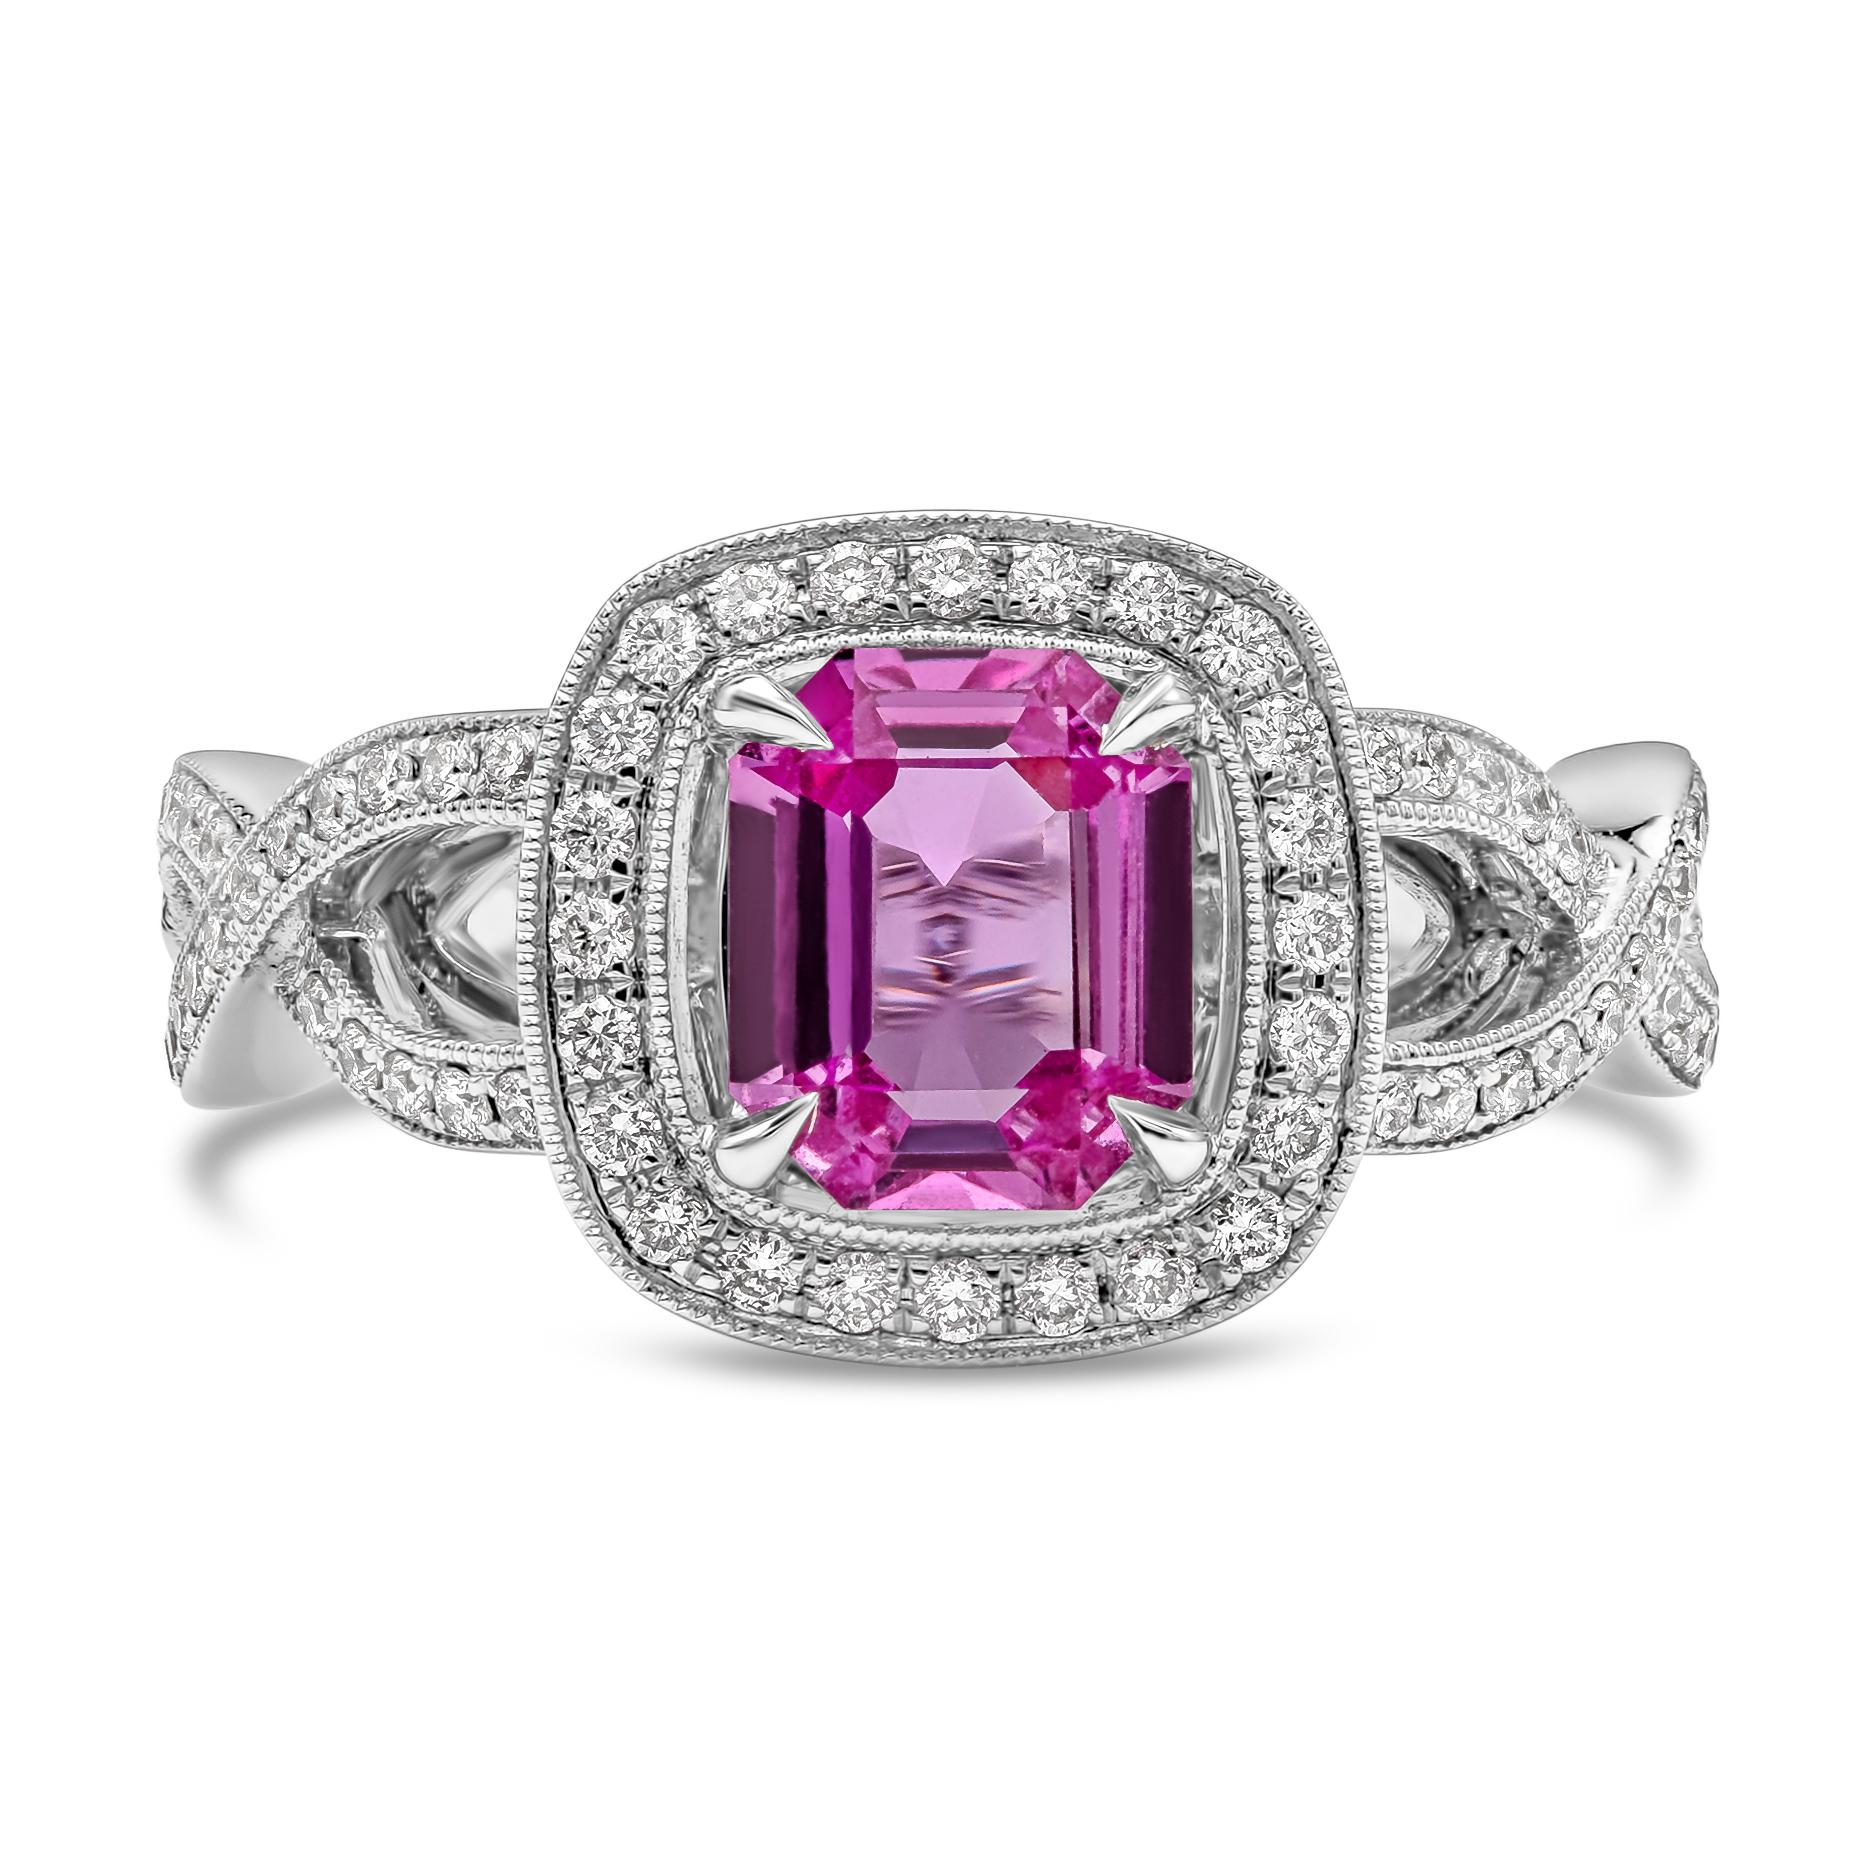 A unique gemstone engagement ring style showcasing an emerald cut pink sapphire center stone weighing 1.12 carat total, set in a classic four prong cushion shape box.  Surrounded and accented by round melee diamonds in a halo design and accenting